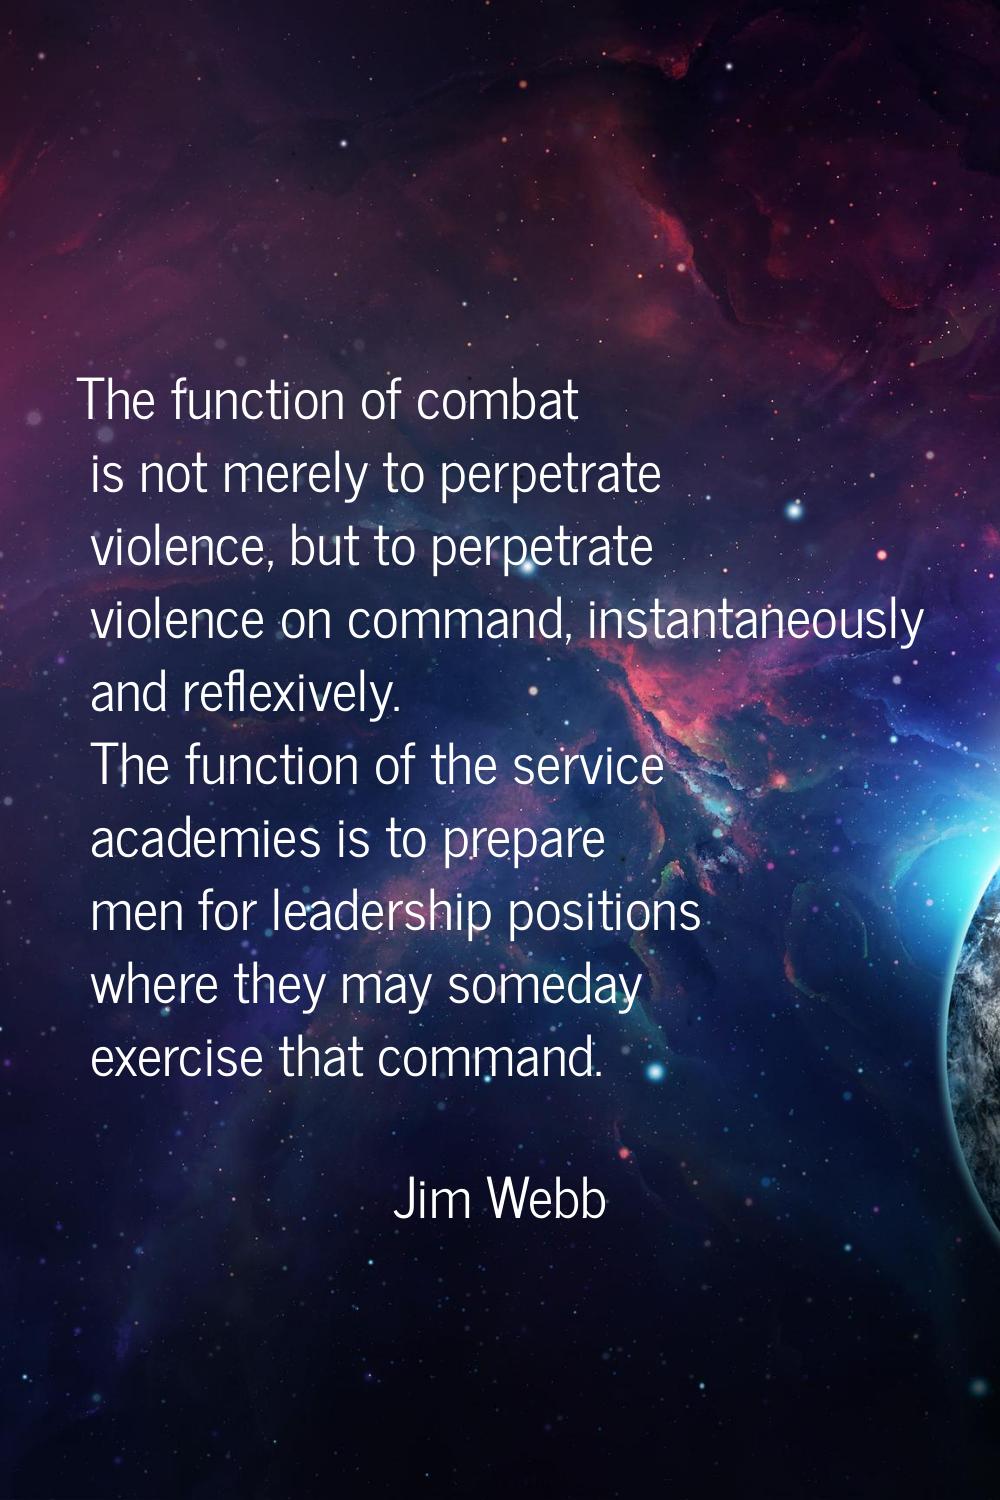 The function of combat is not merely to perpetrate violence, but to perpetrate violence on command,